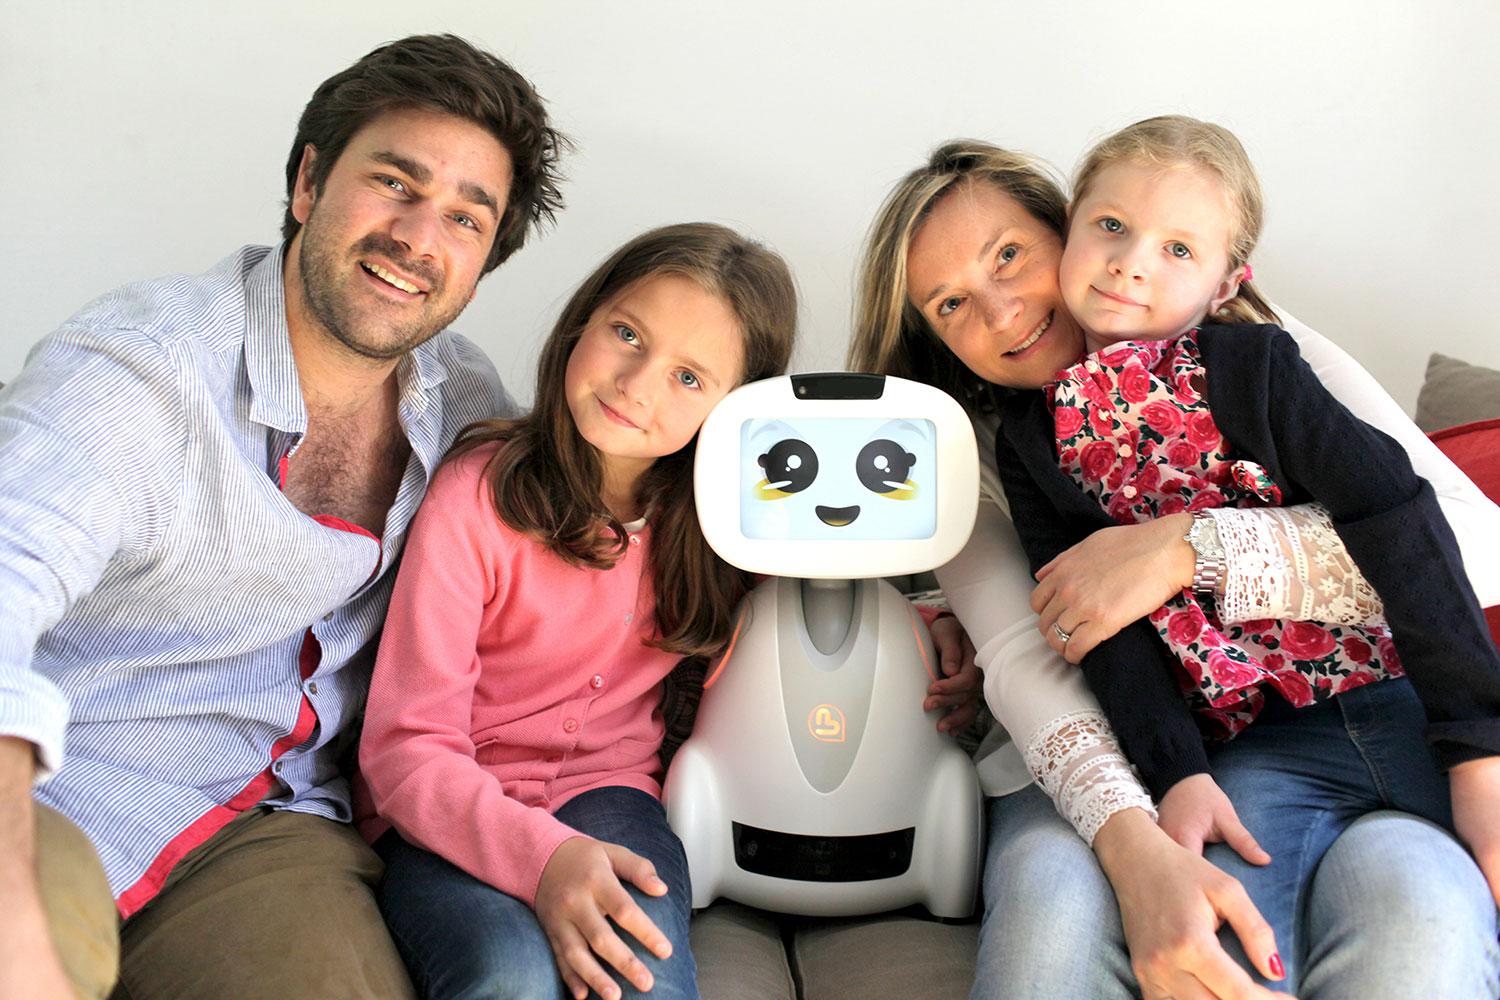 buddy companion robot hands on familly